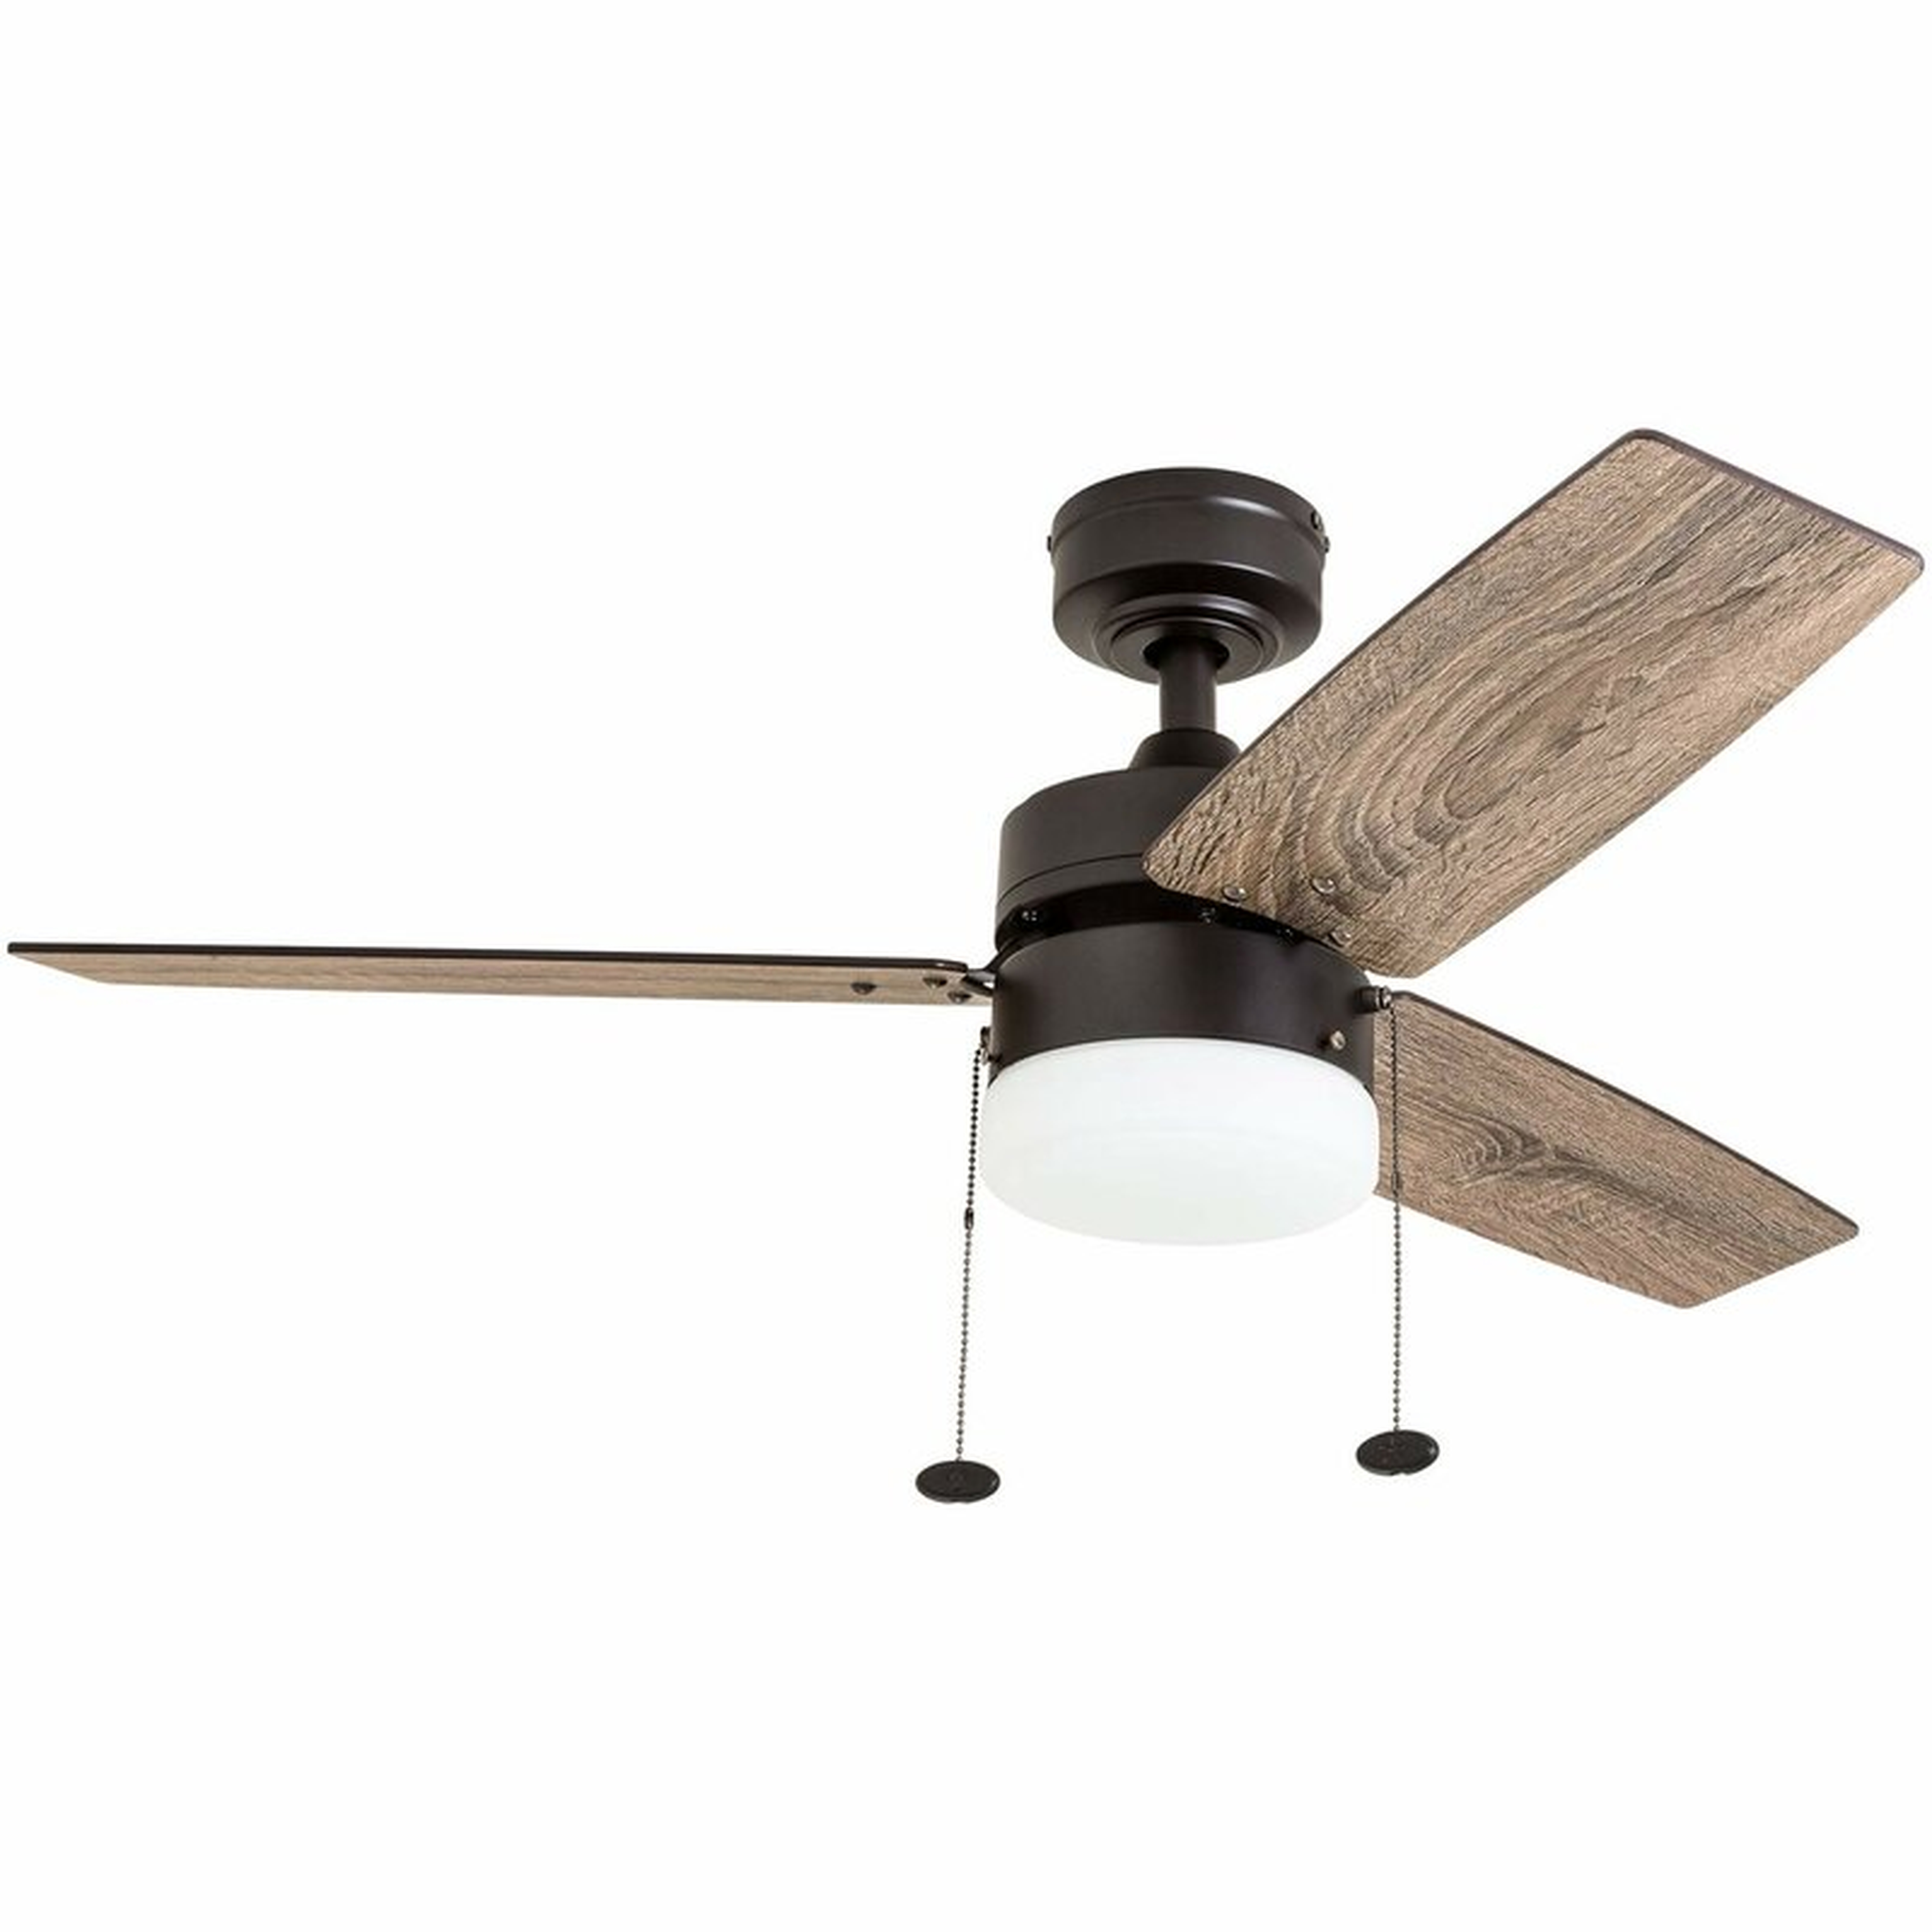 42" Chanice 3 - Blade Propeller Ceiling Fan with Pull Chain and Light Kit Included - Wayfair